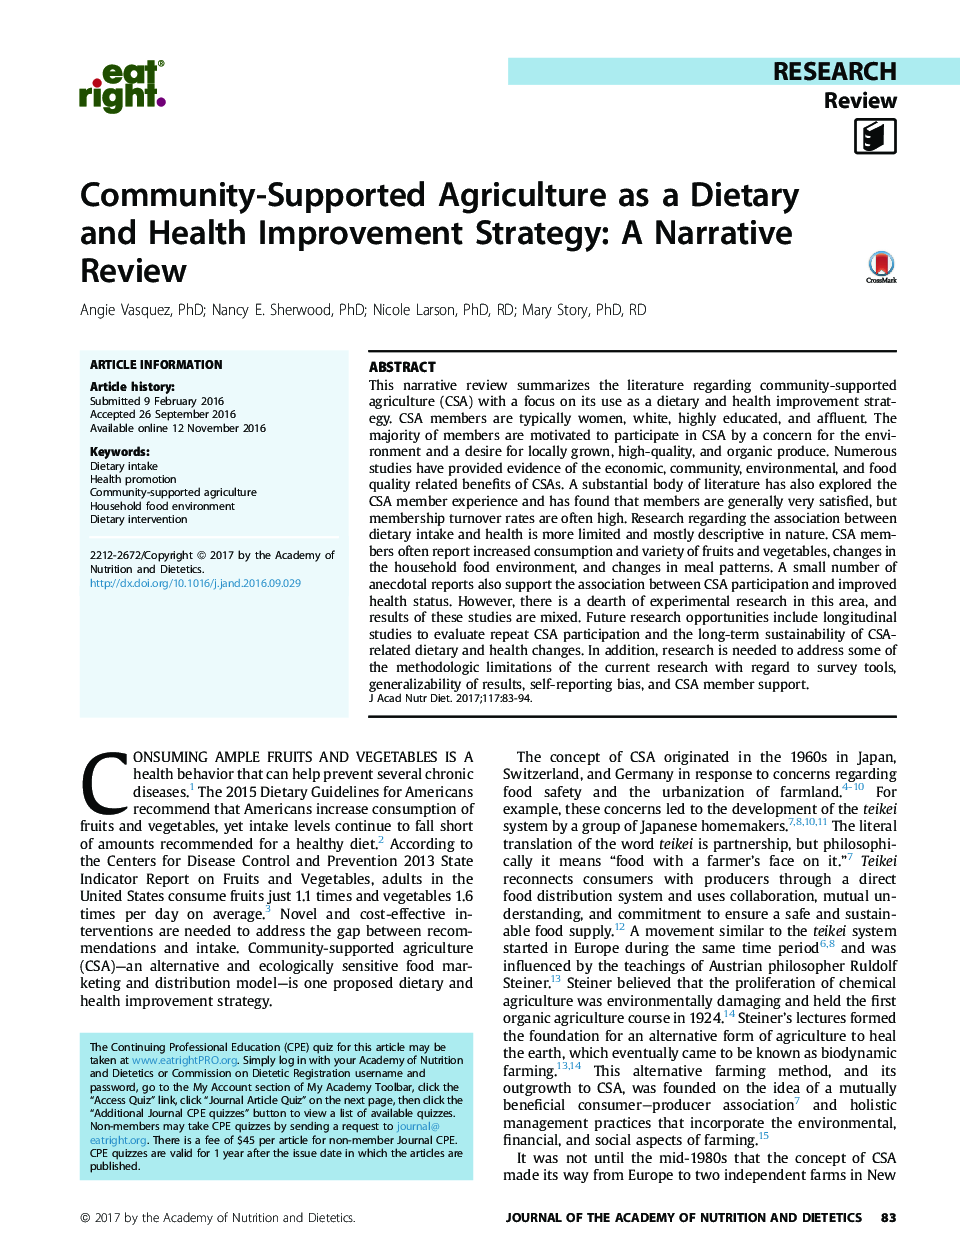 Community-Supported Agriculture as a Dietary and Health Improvement Strategy: A Narrative Review